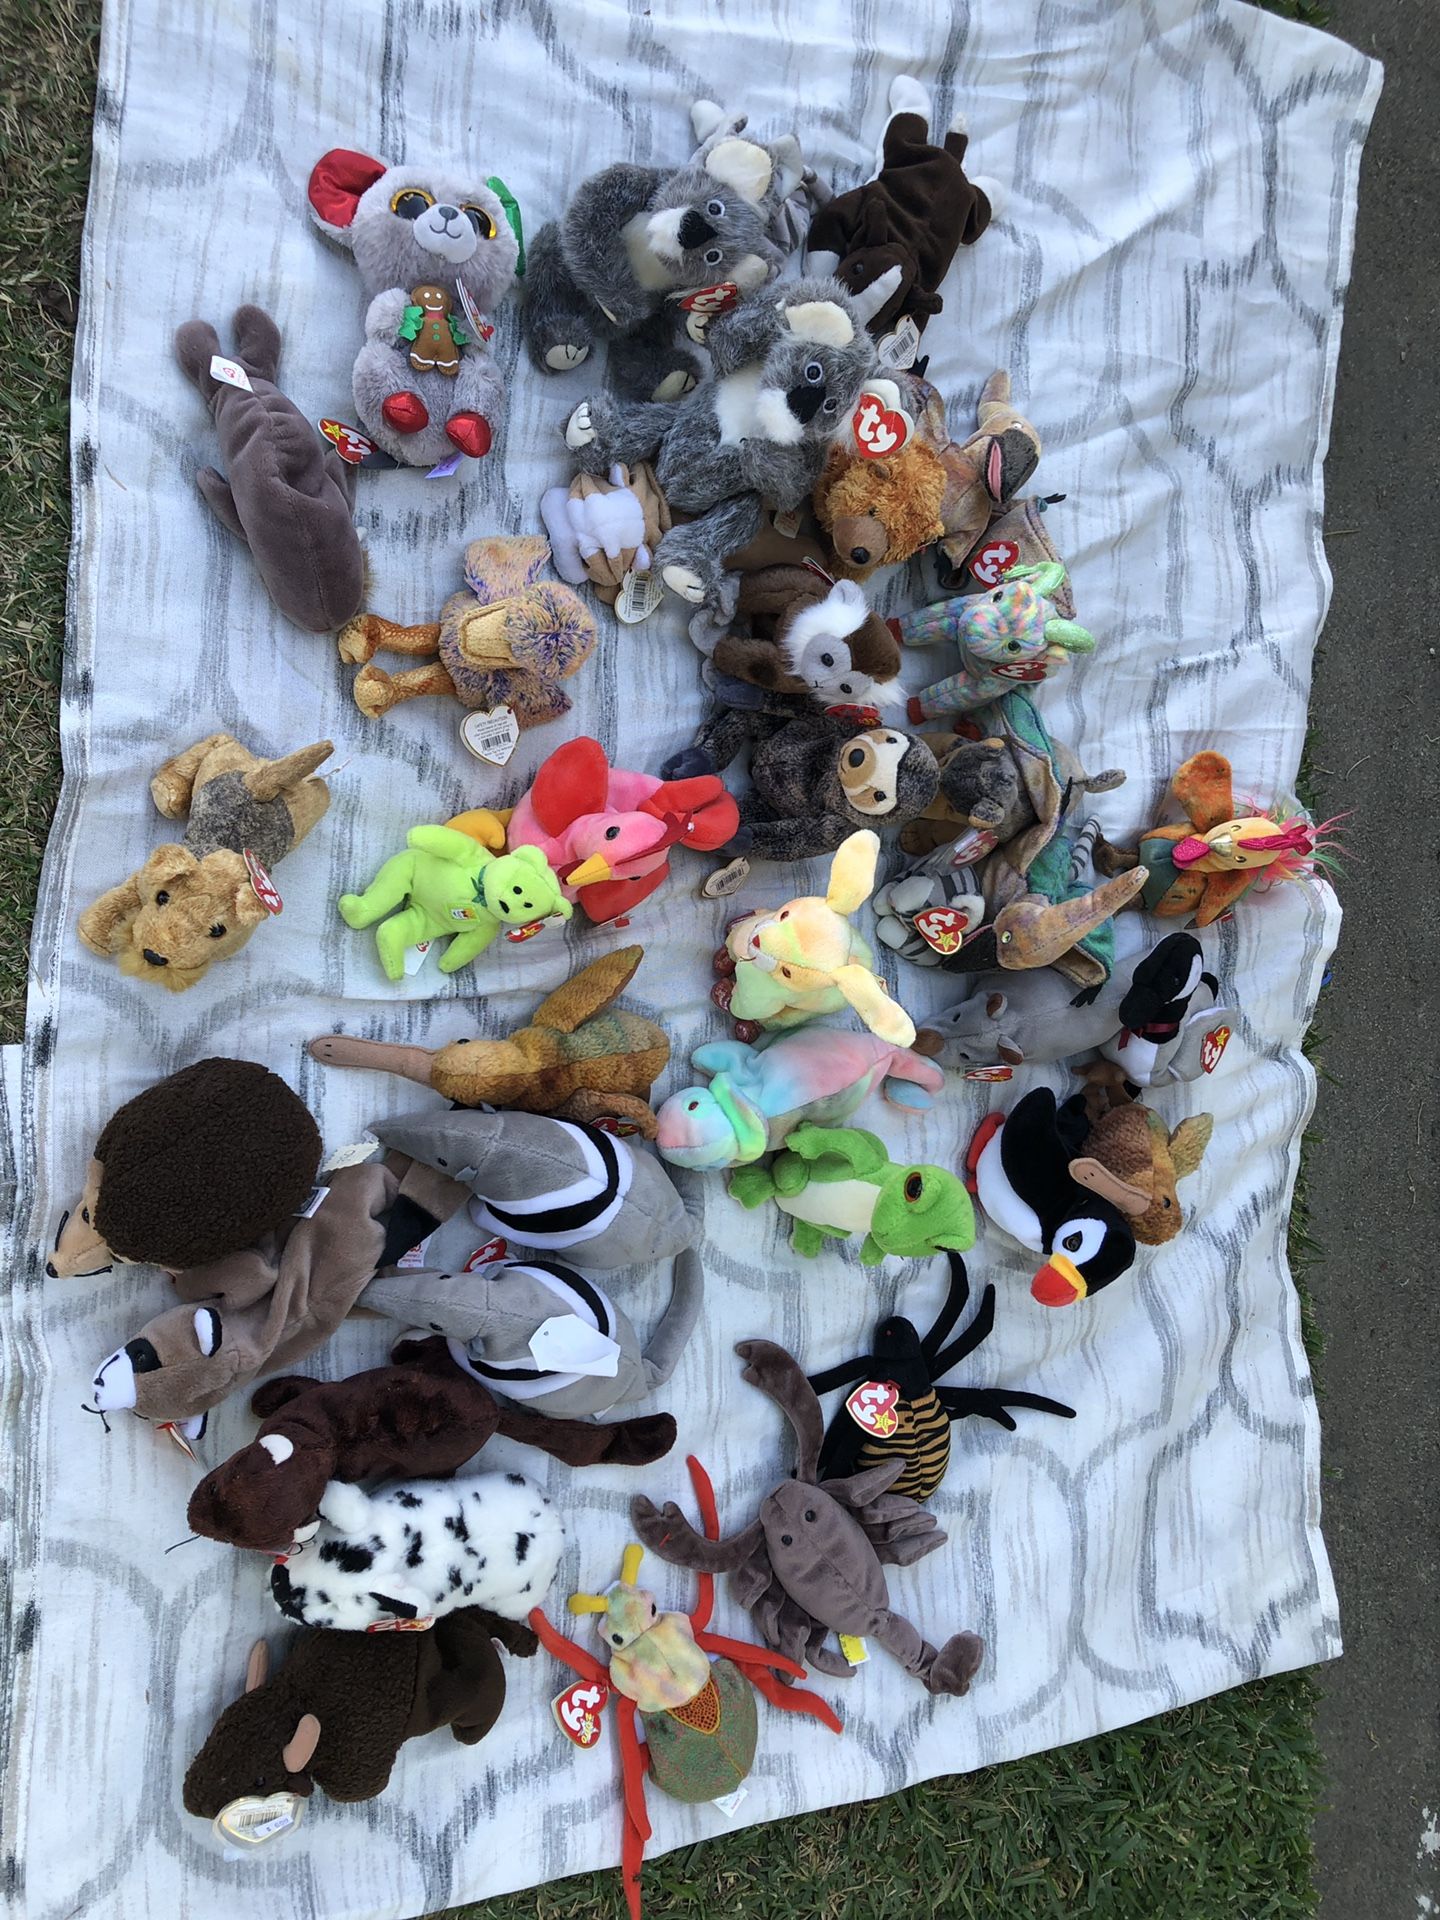 Beanie babies/stuffed animals-$1 each-great condition!